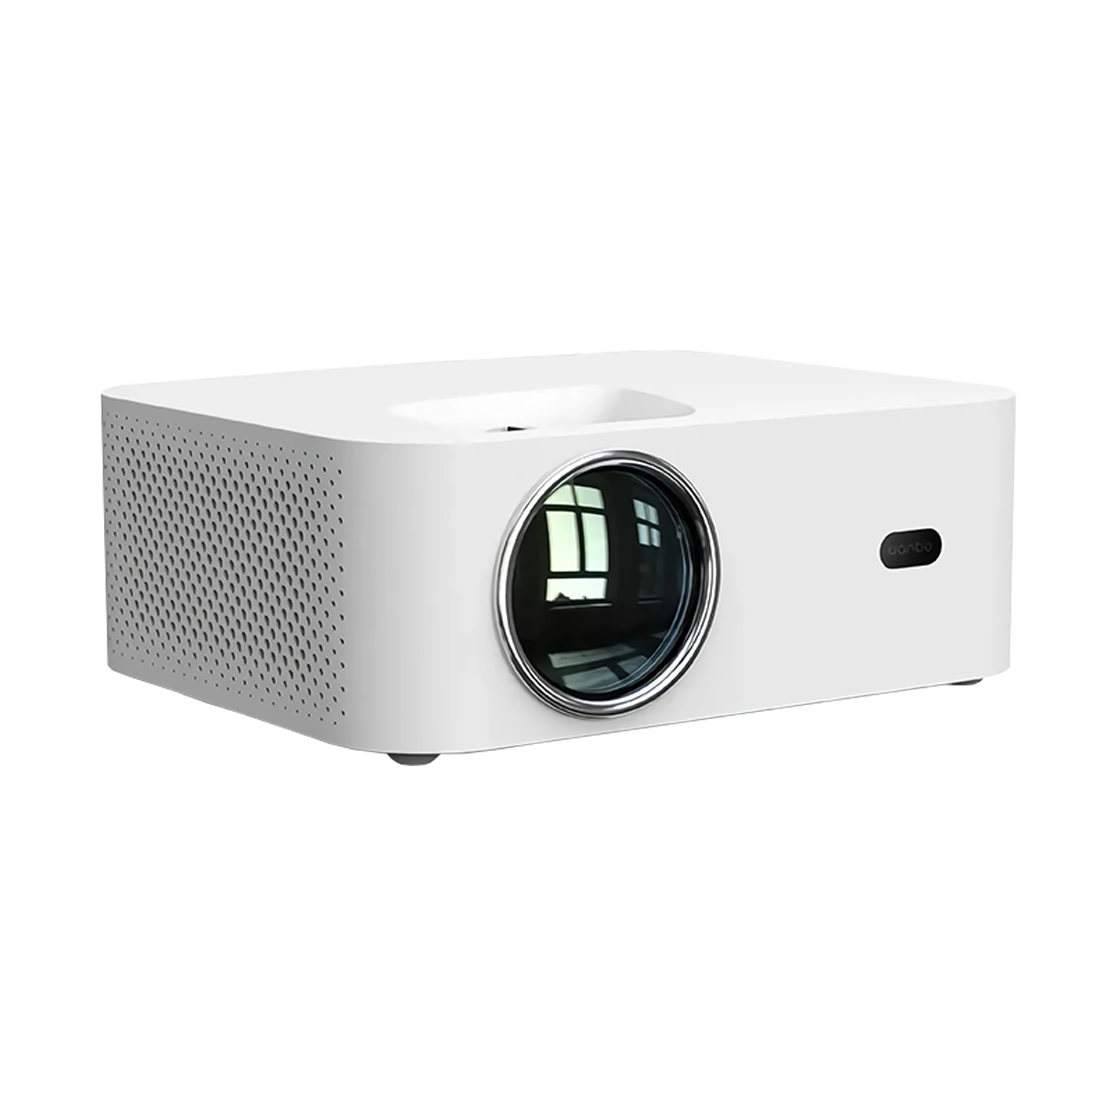 Wanbo Portable Video Projector X1 Pro